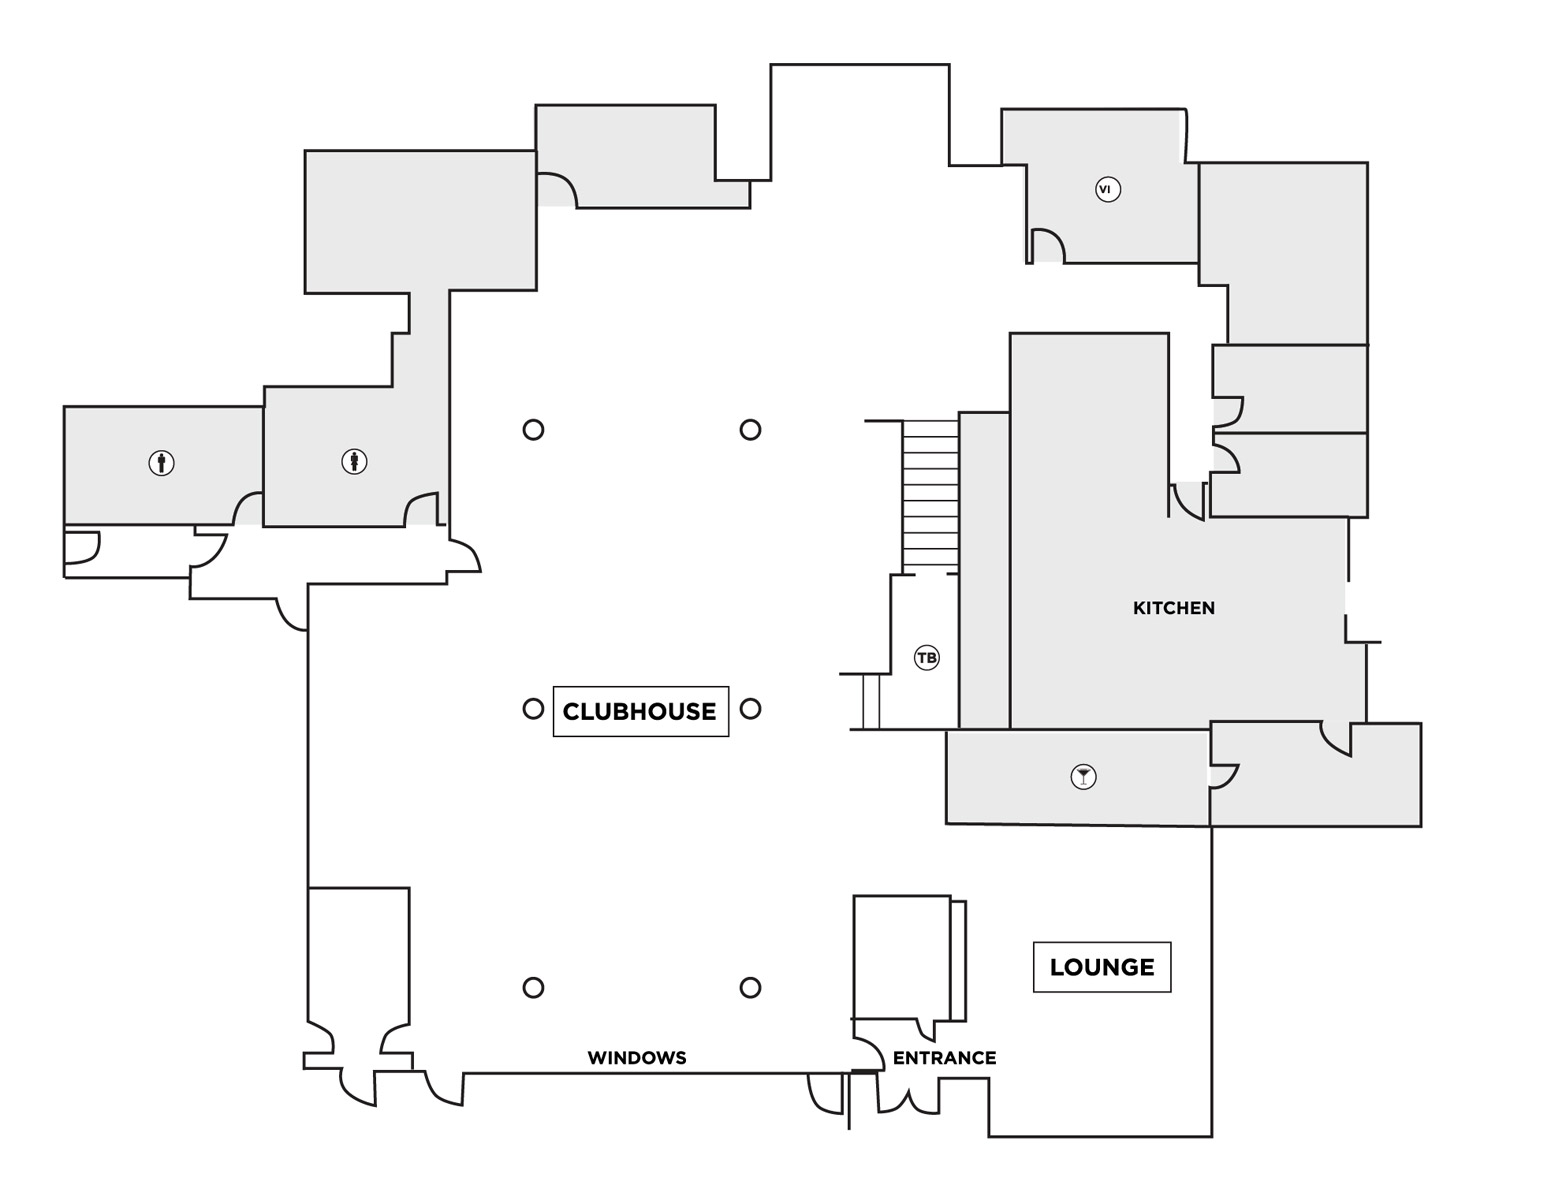 Clubhouse Eventspace Diagram 2